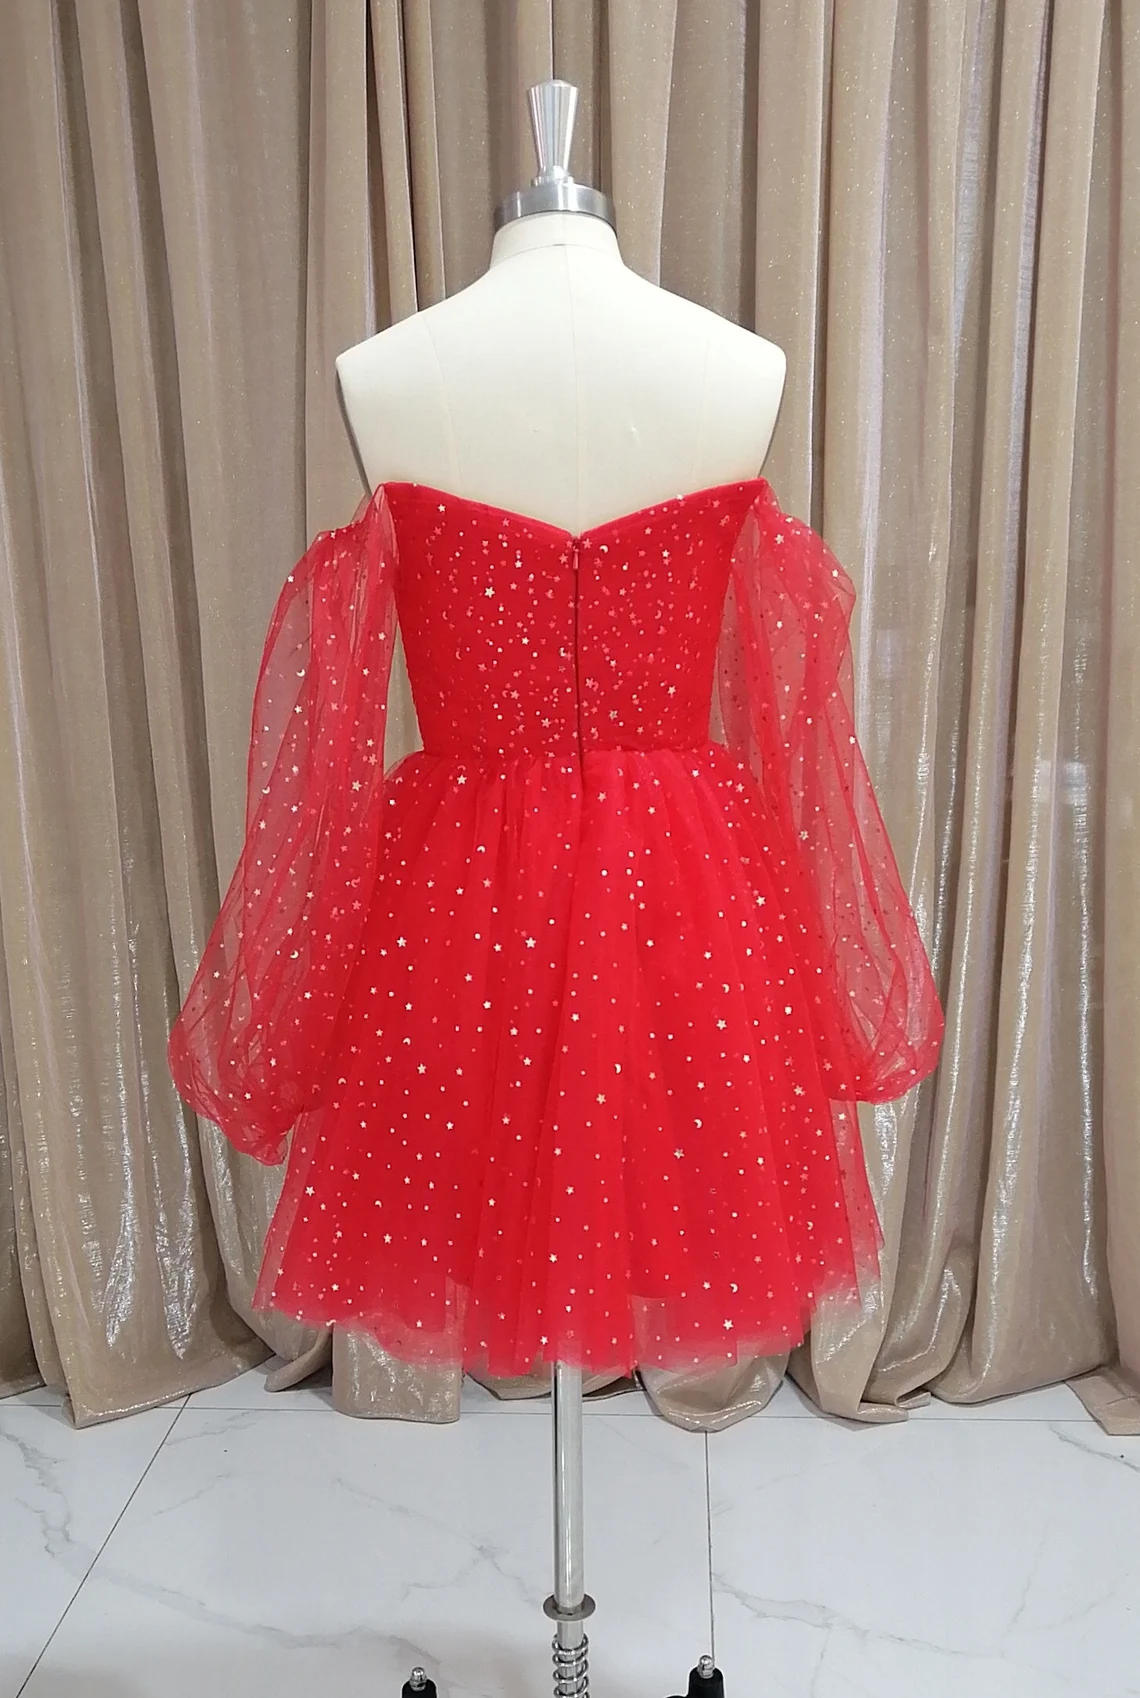 Red Tulle Long Puffy Sleeves Short Prom Dress, Red Tulle Homecoming Dress